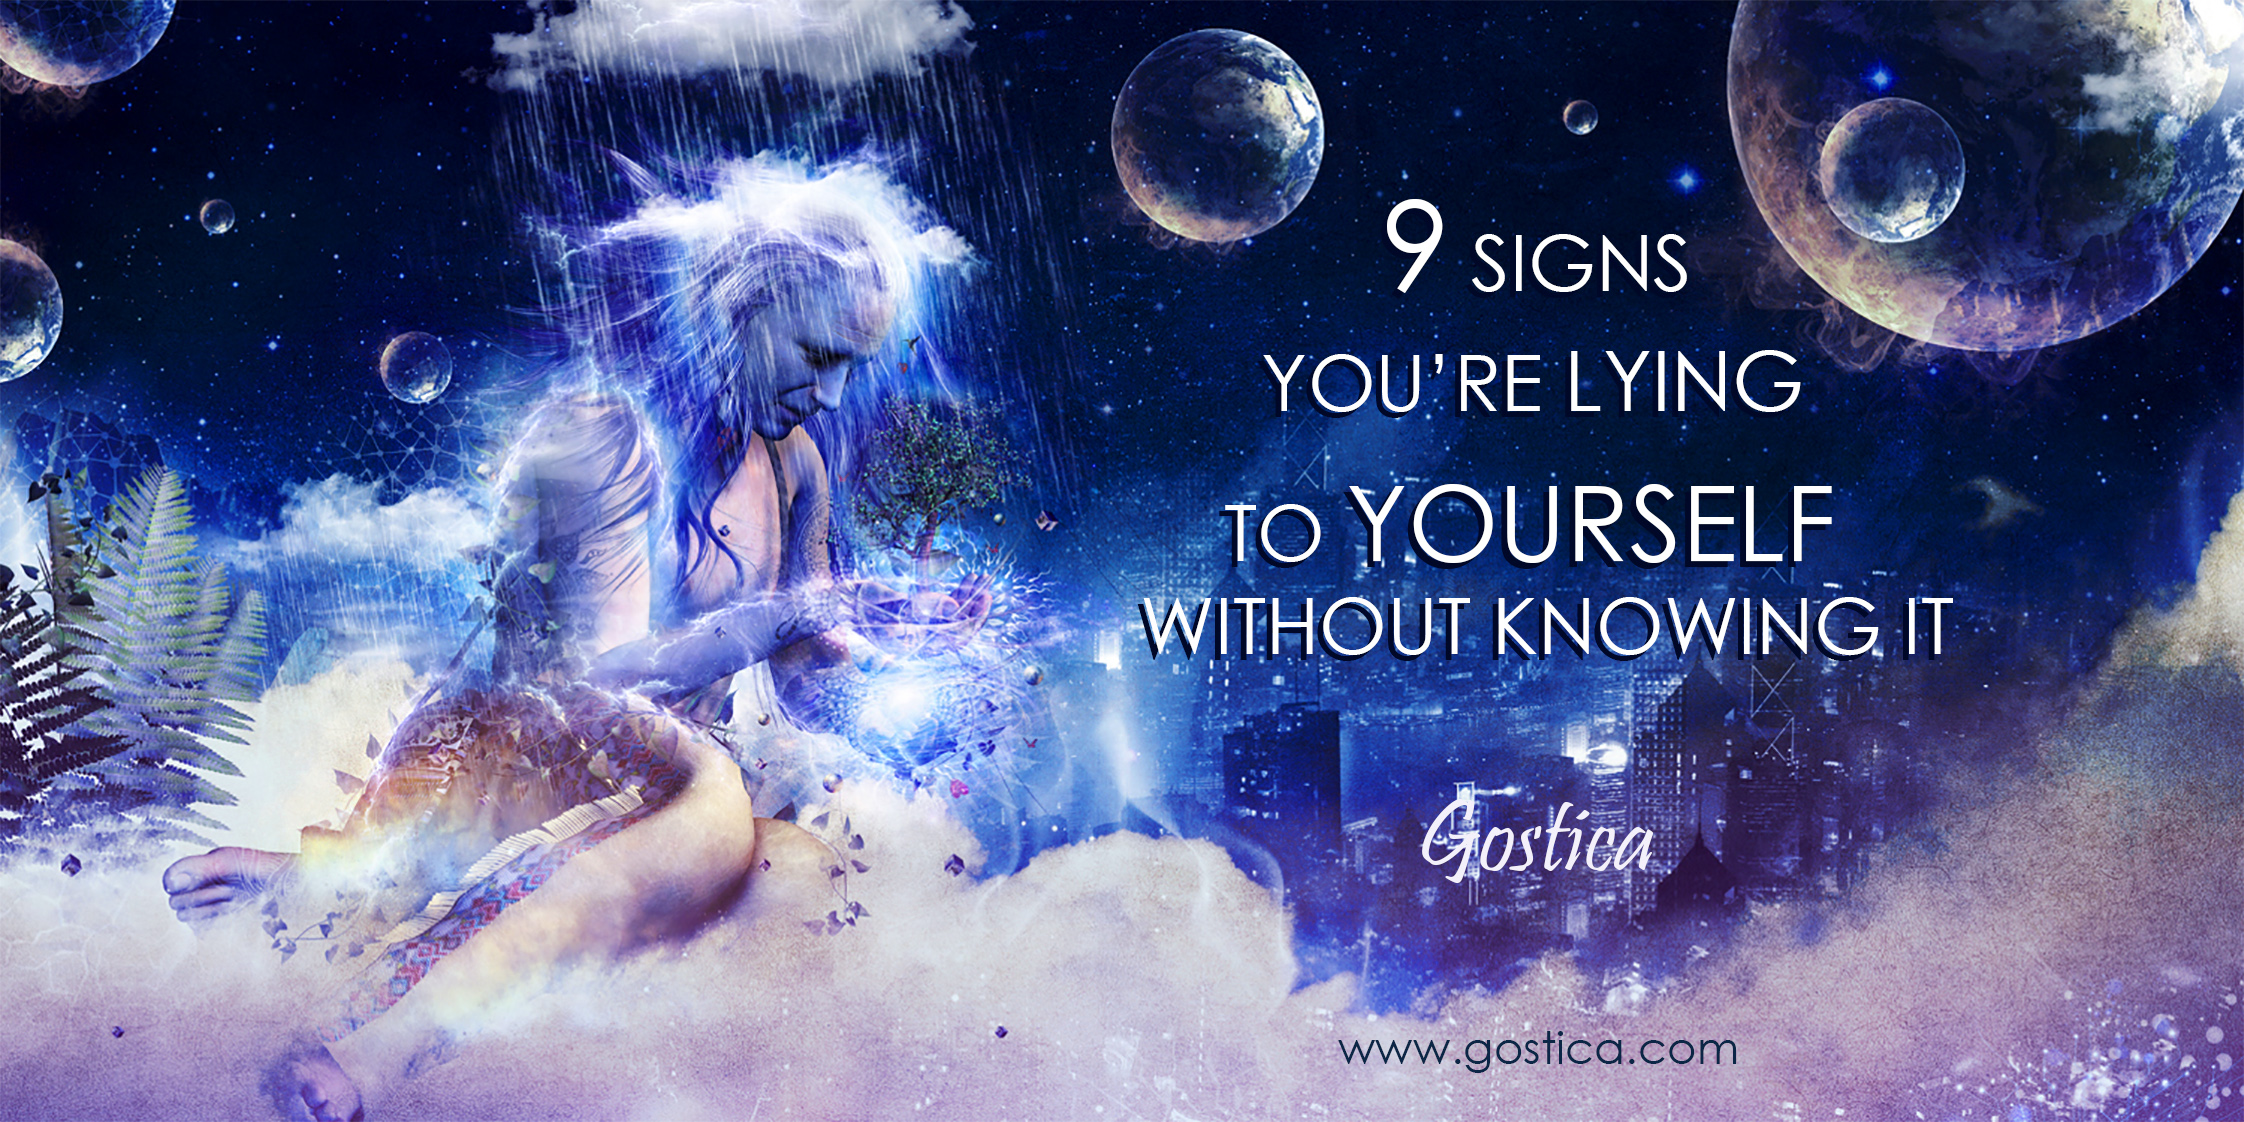 9-SIGNS-YOU’RE-LYING-TO-YOURSELF-WITHOUT-KNOWING-IT.jpg